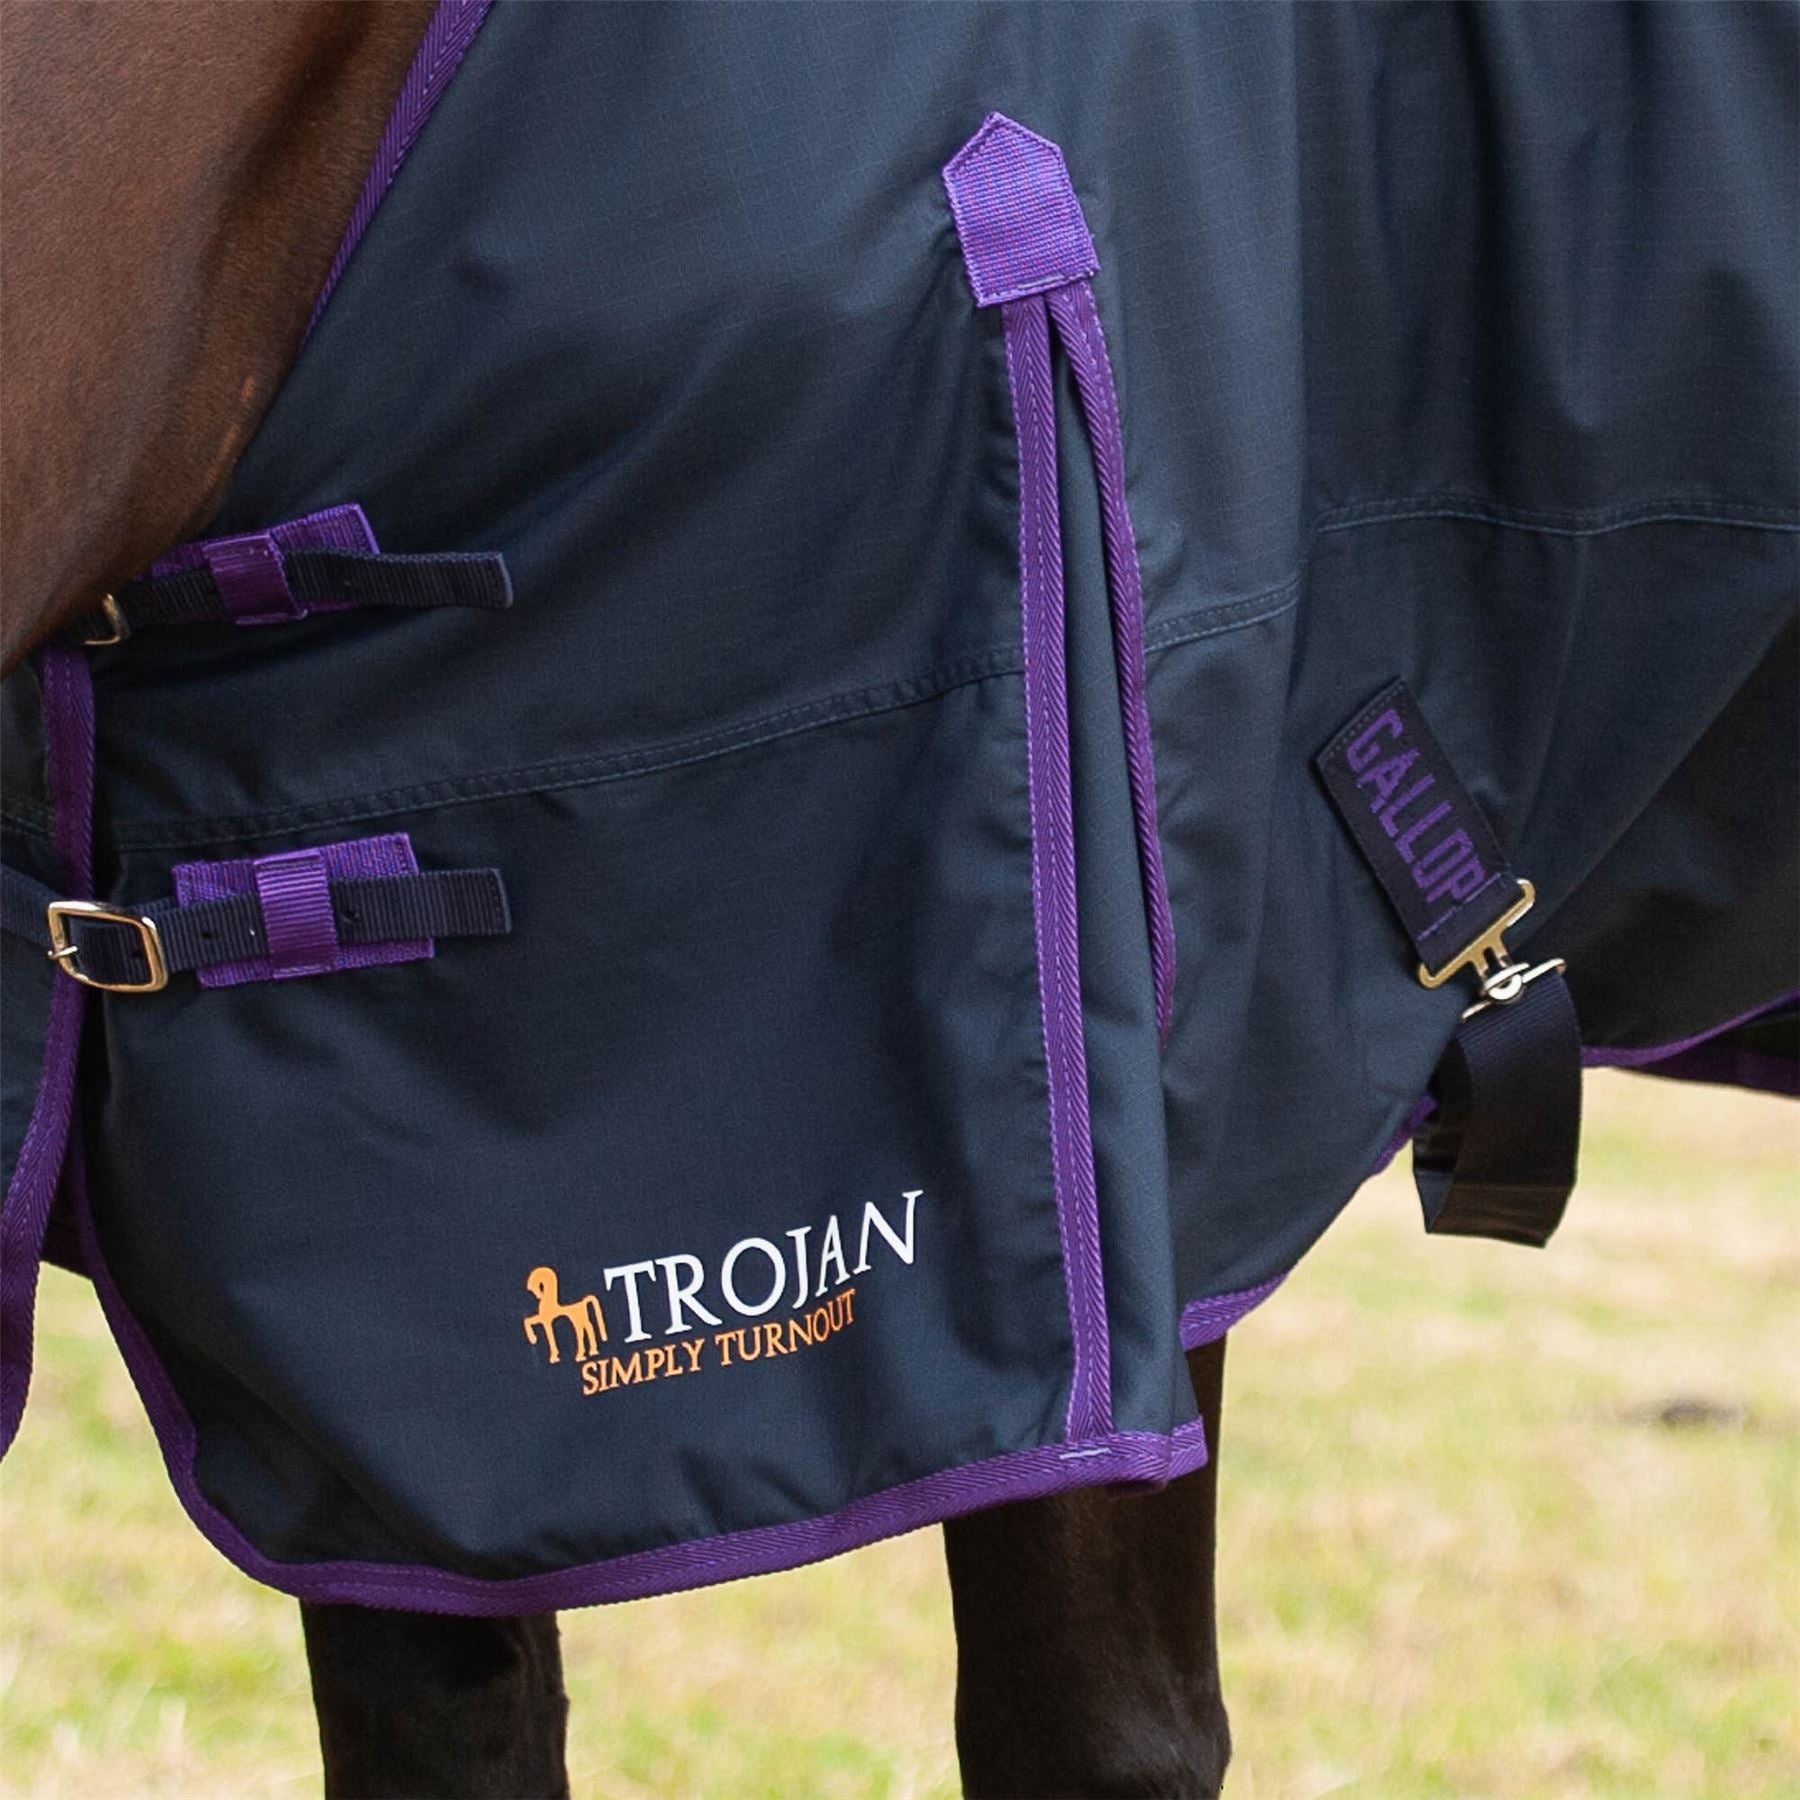 Gallop Equestrian Trojan Light Weight Turnout Rug - Just Horse Riders